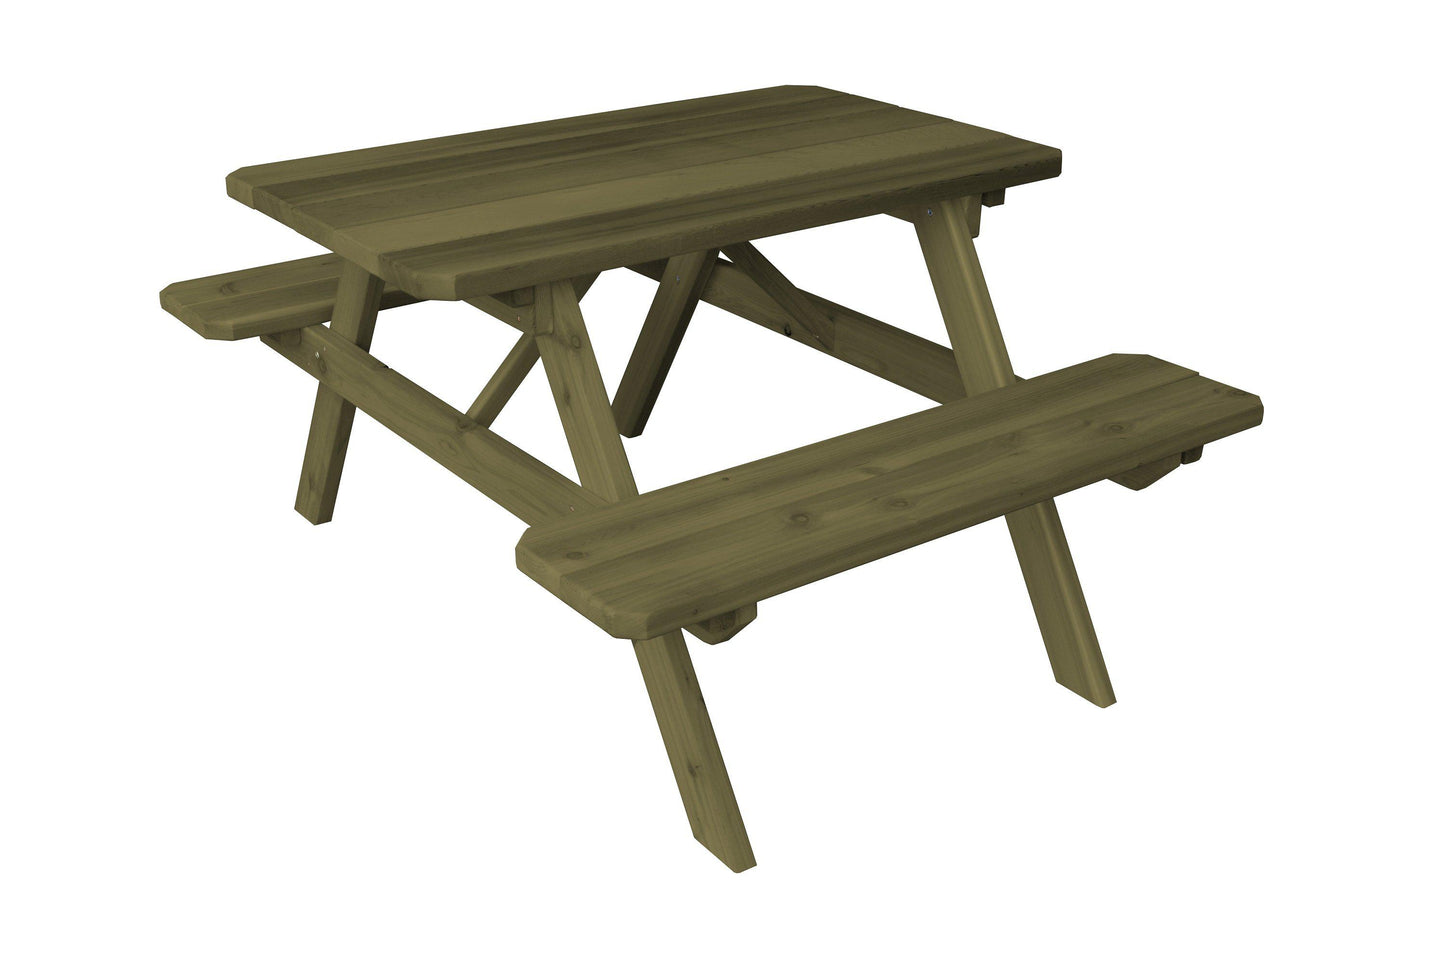 A&L FURNITURE CO. Western Red Cedar 4' Table w/Attached Benches - Specify for FREE 2" Umbrella Hole - LEAD TIME TO SHIP 2 WEEKS